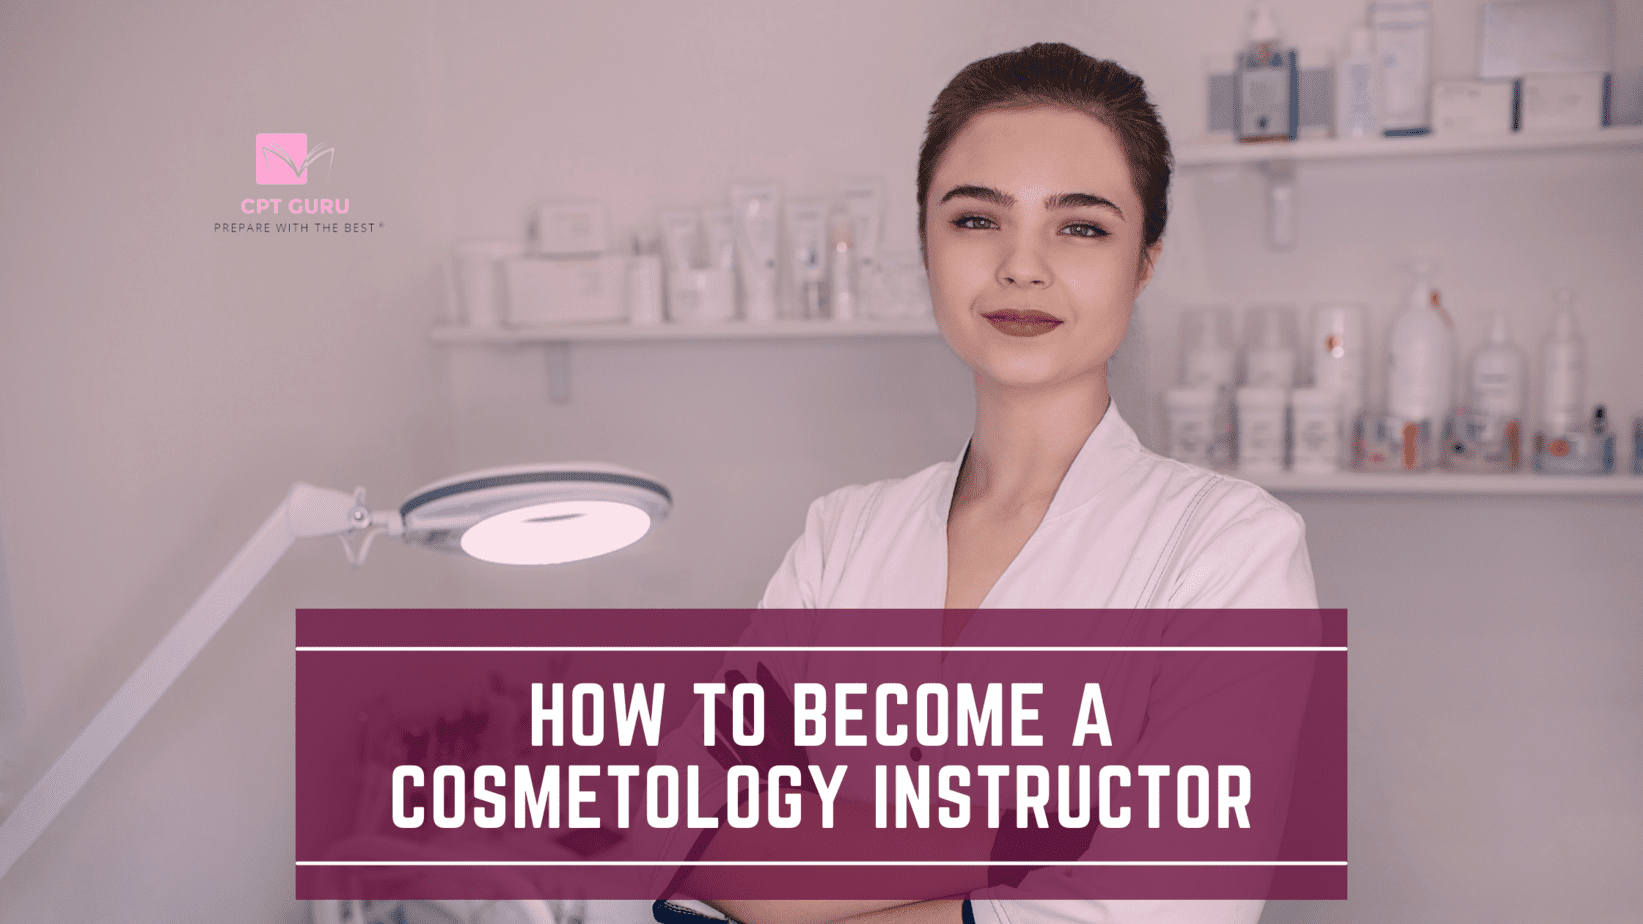 How to Become a Cosmetology Instructor